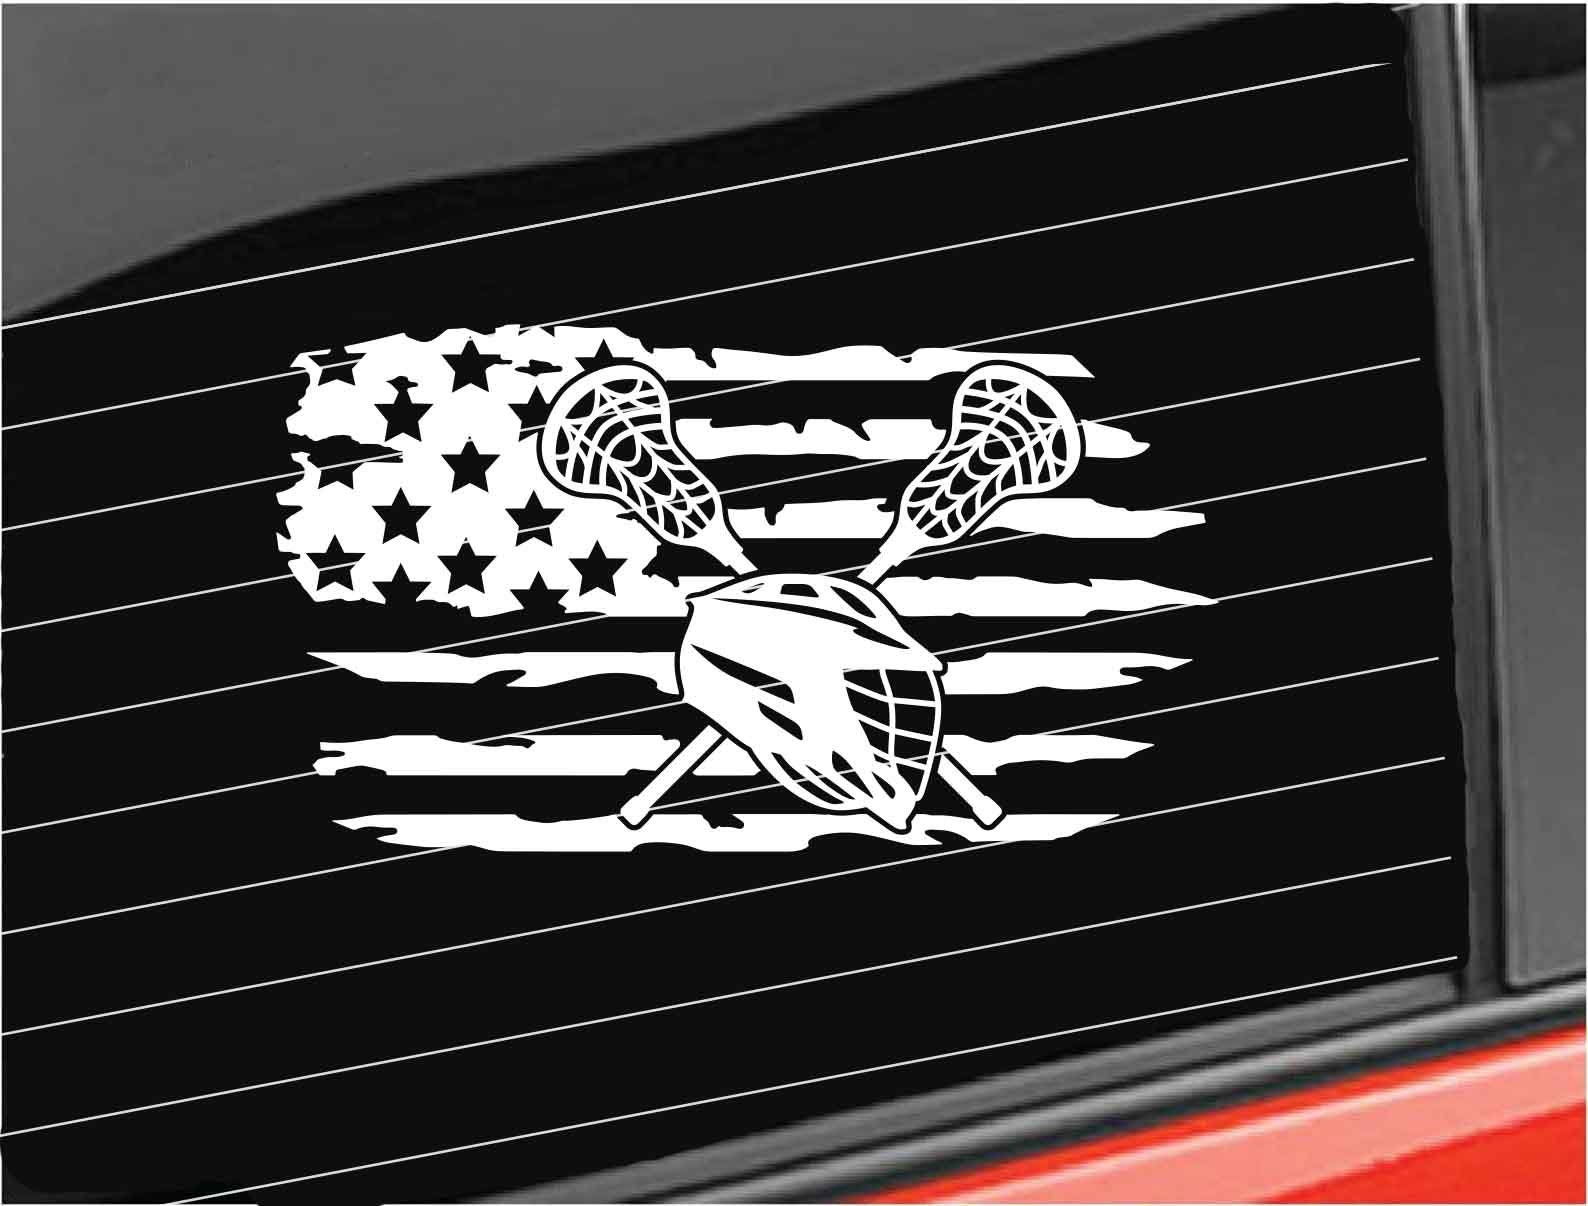 Lacrosse Vinyl Decal, Distressed America Flag Lacrosse Decal, Lax  Home/laptop/computer/truck/car Bumper Sticker Decal 